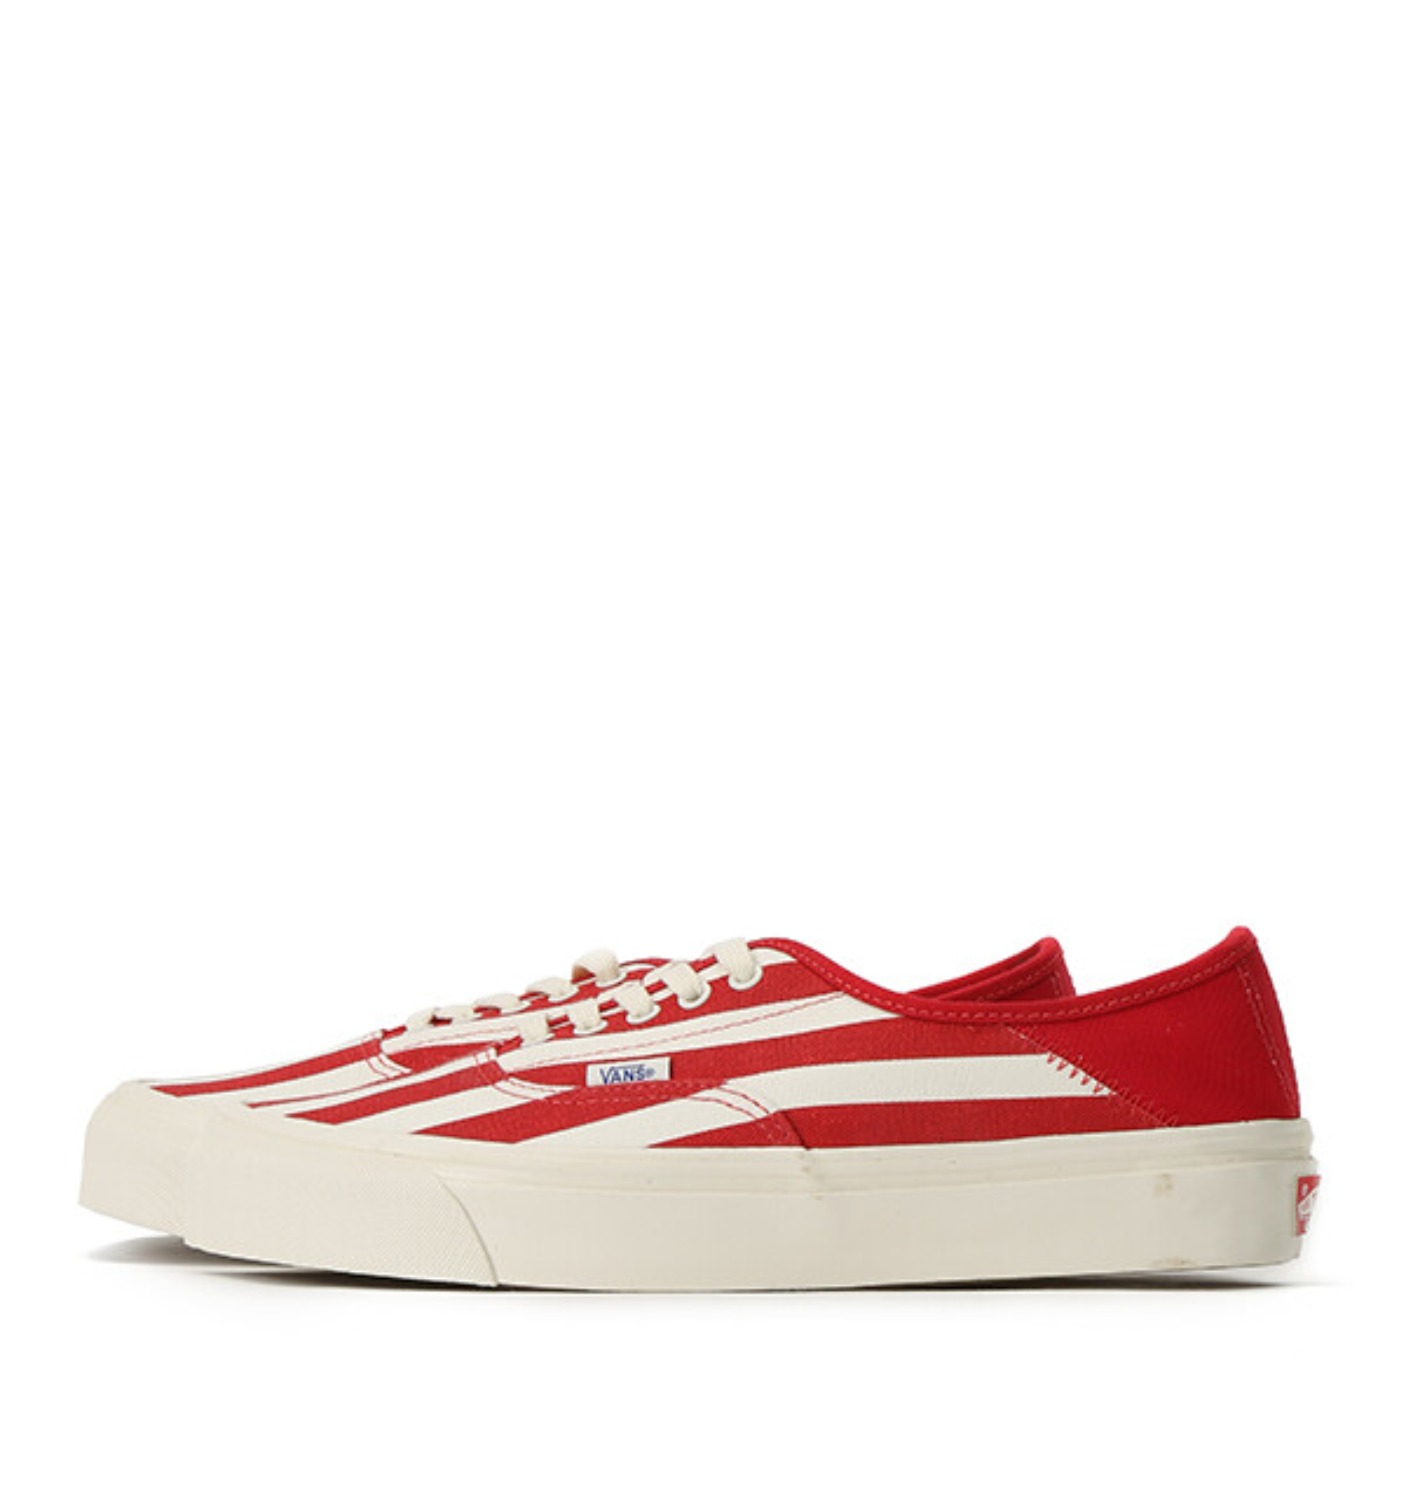 OG STYLE 43 DX CANVAS STRIPE RACING RED